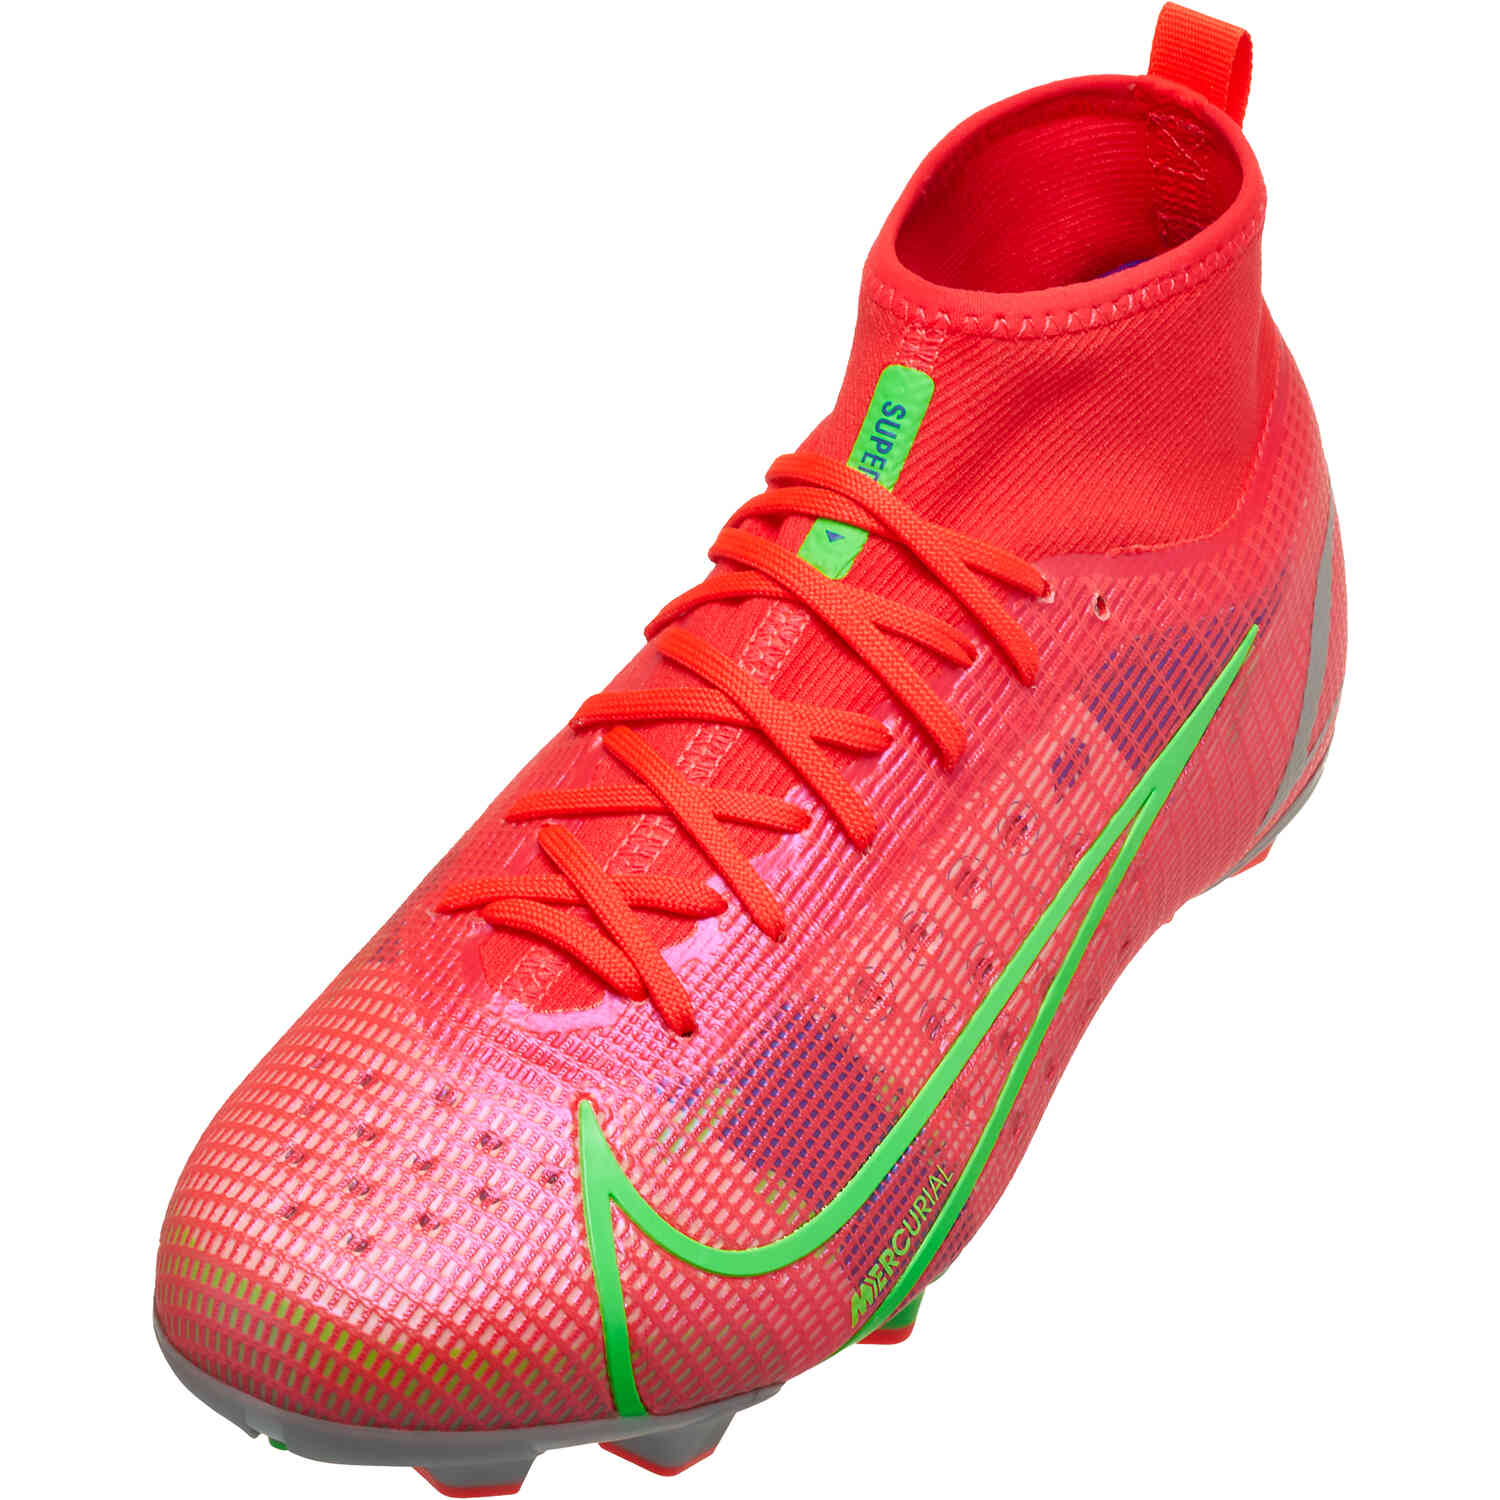 soccer cleats mercurial superfly